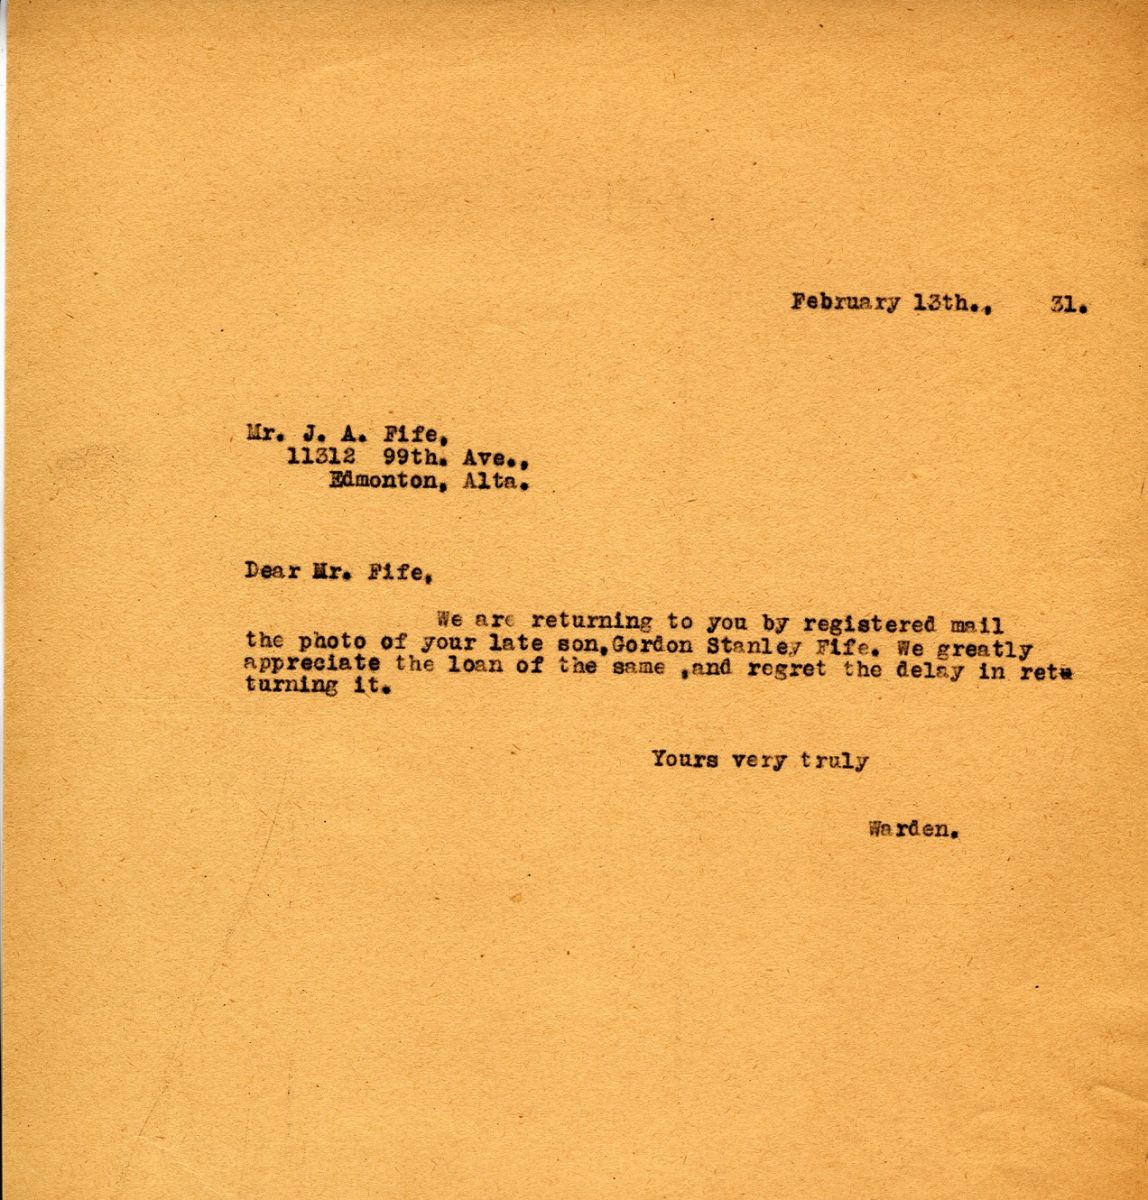 Letter from the Warden to Mrs. J.A. Fife, 13th February 1931